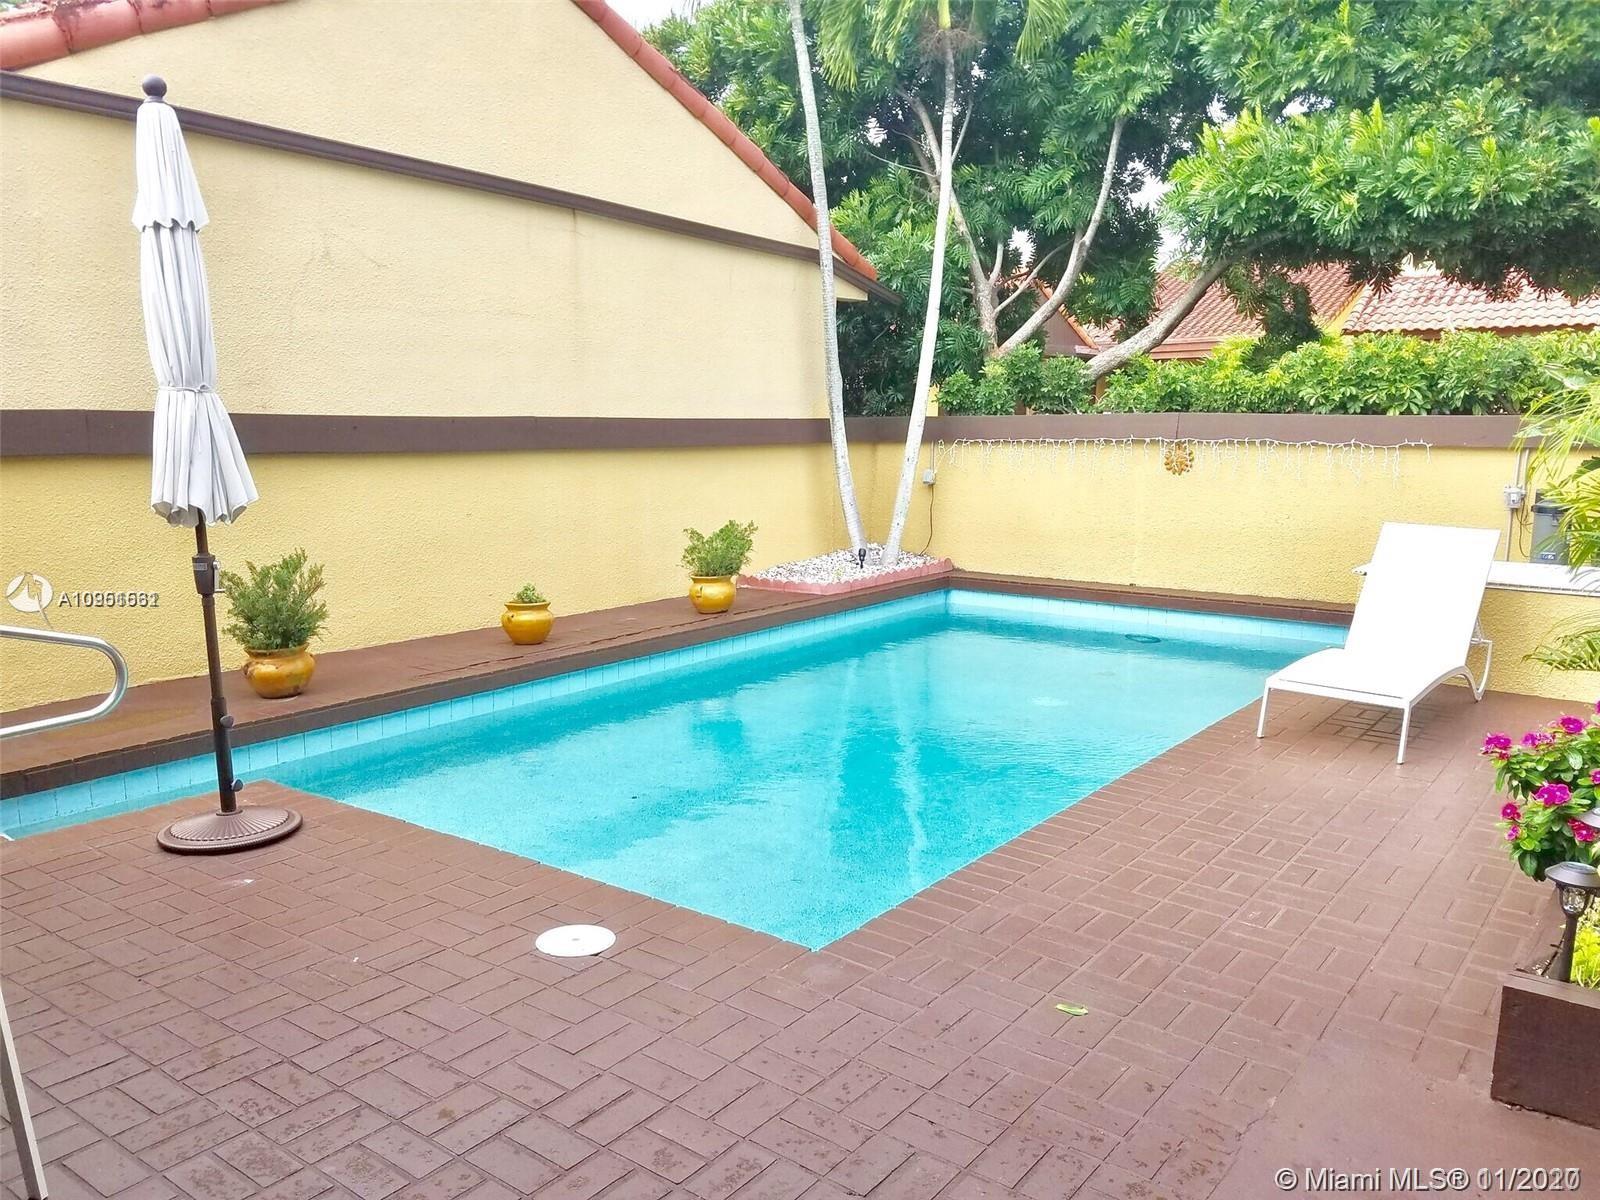 a view of a swimming pool with a yard and chair